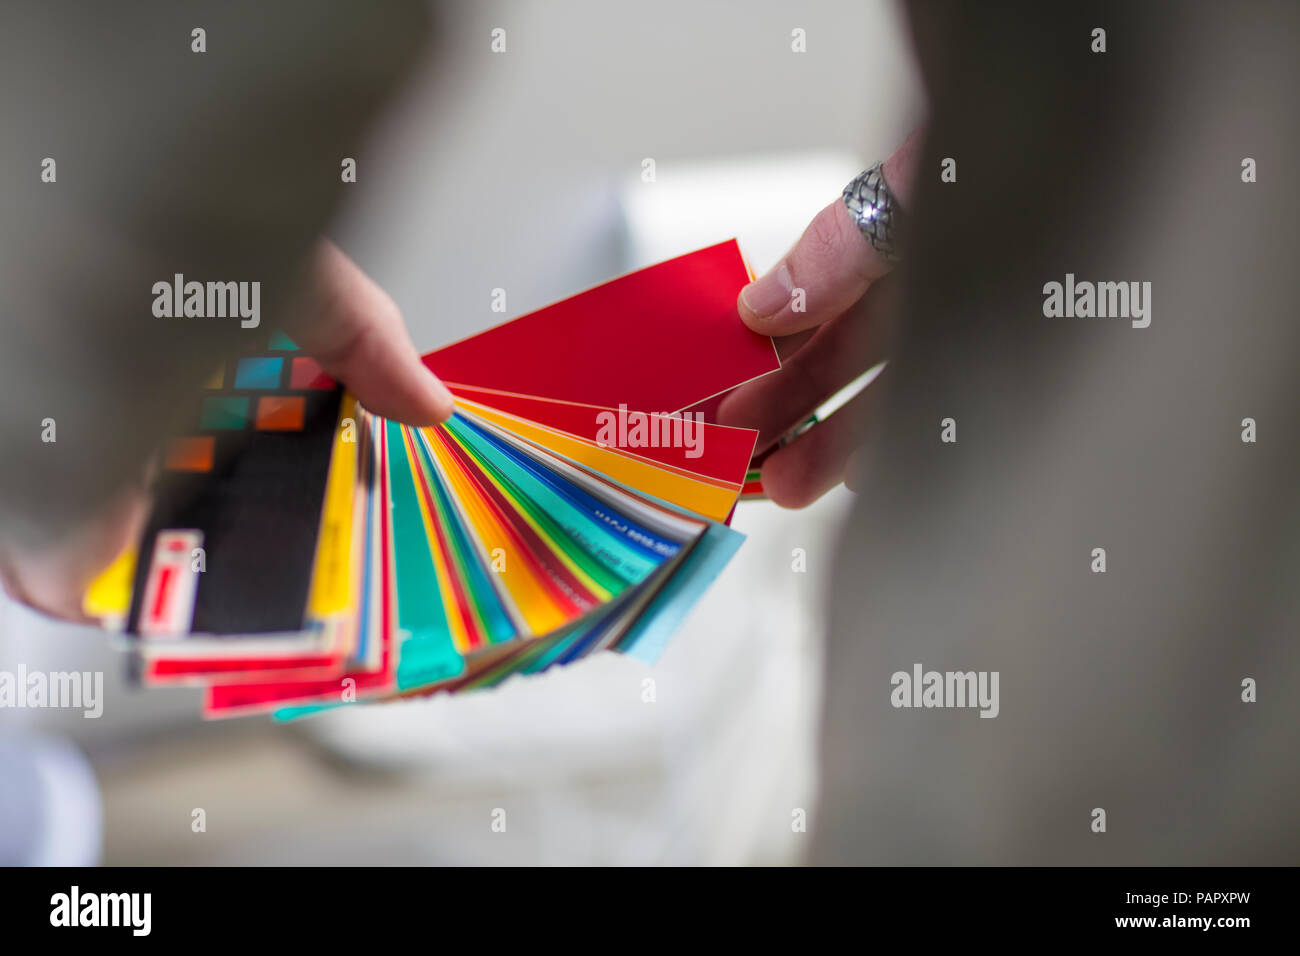 Close-up of man holding colour swatches in office Stock Photo